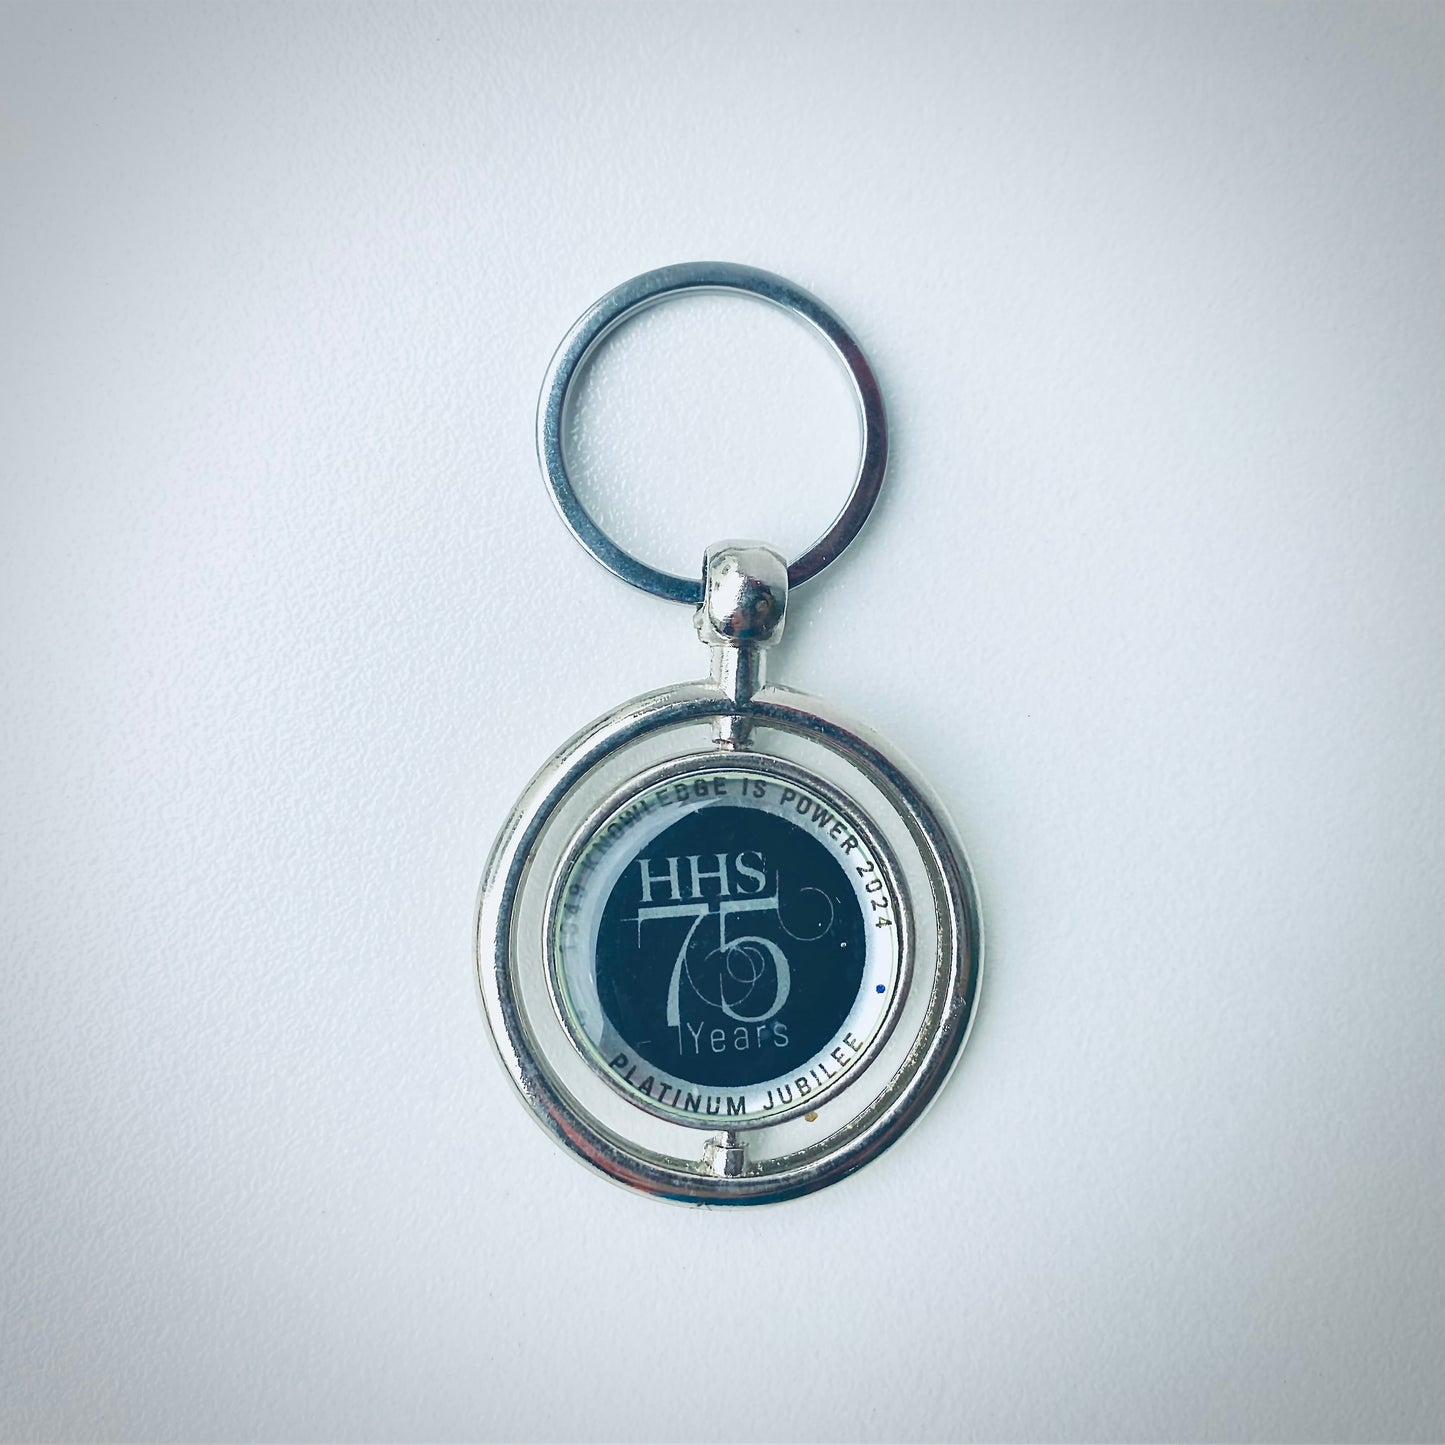 HHS Metal Keychain